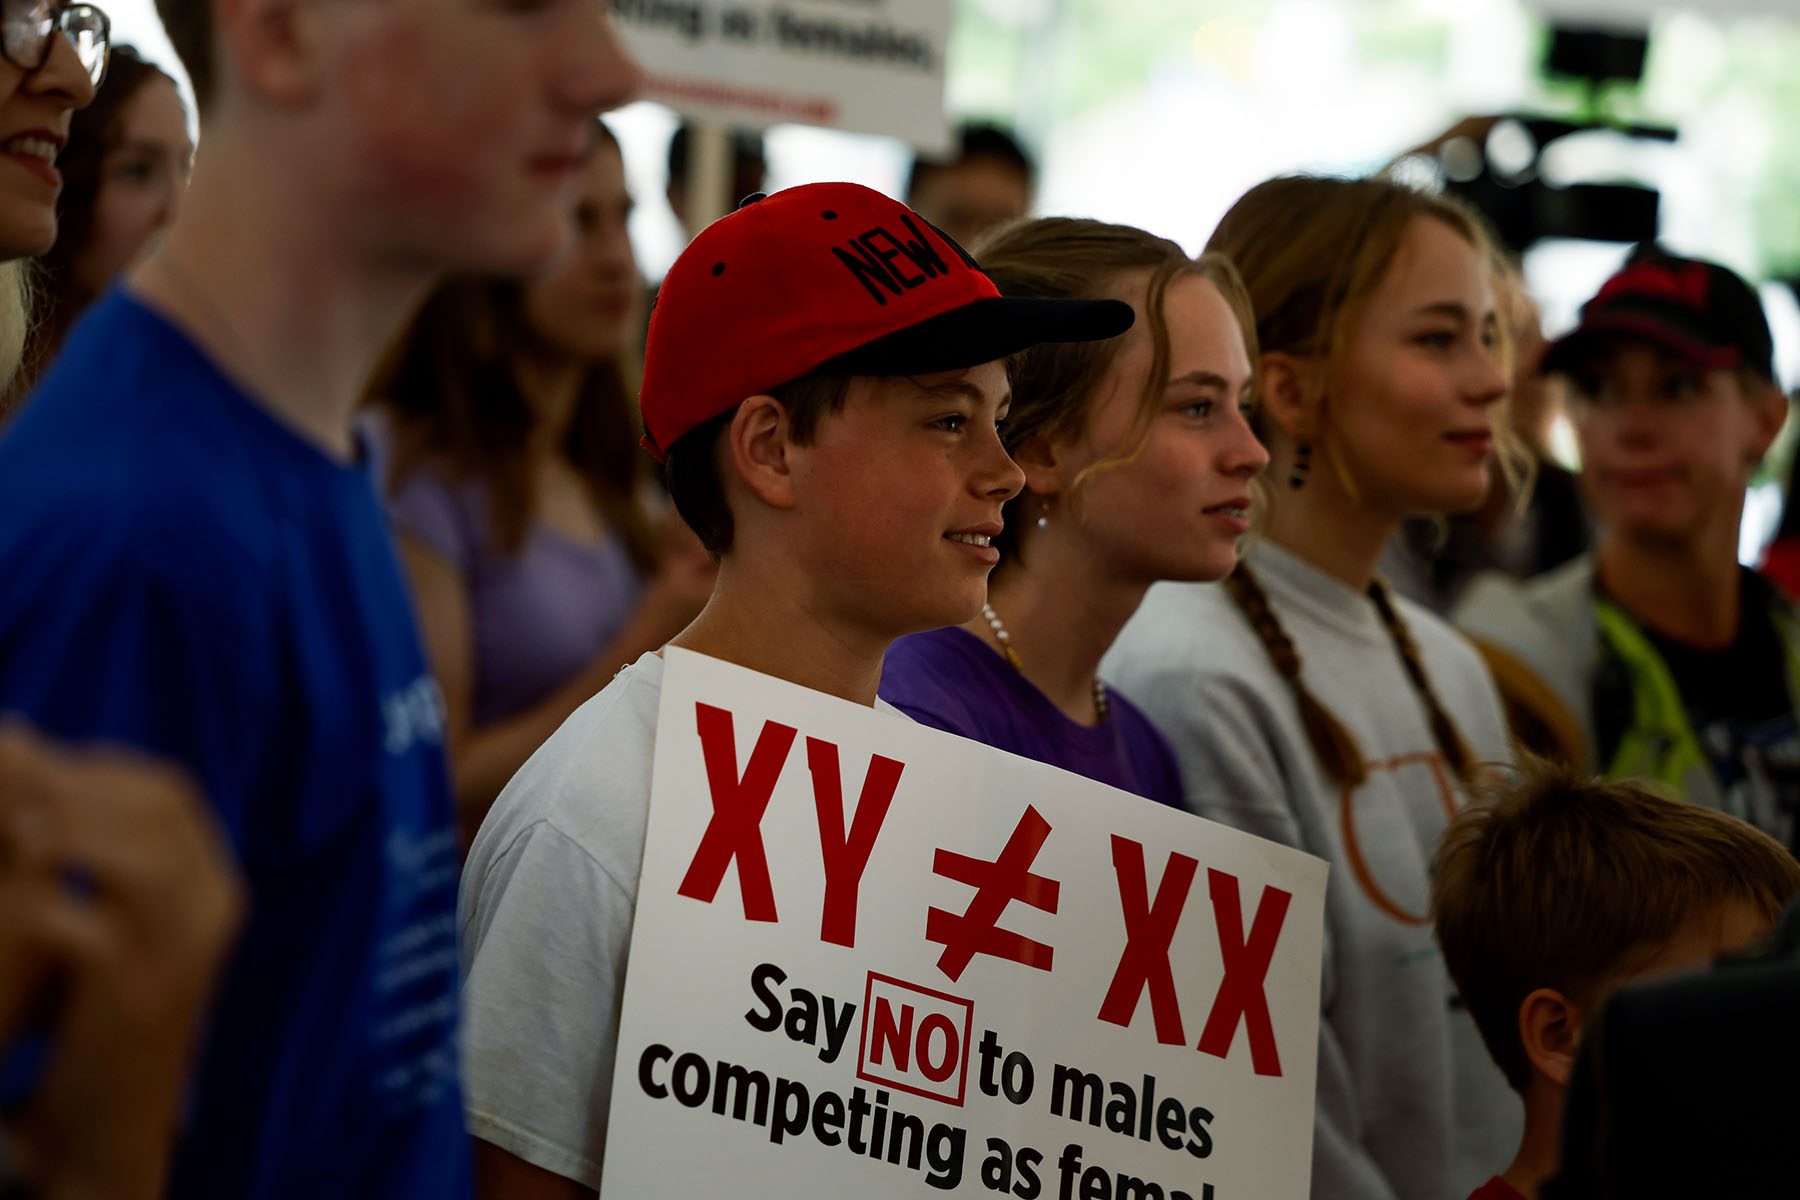 Demonstrators listen during a rally. In the foreground, a young person holds a sign that reads "XY is not equal to XX, say no to males competing as females"